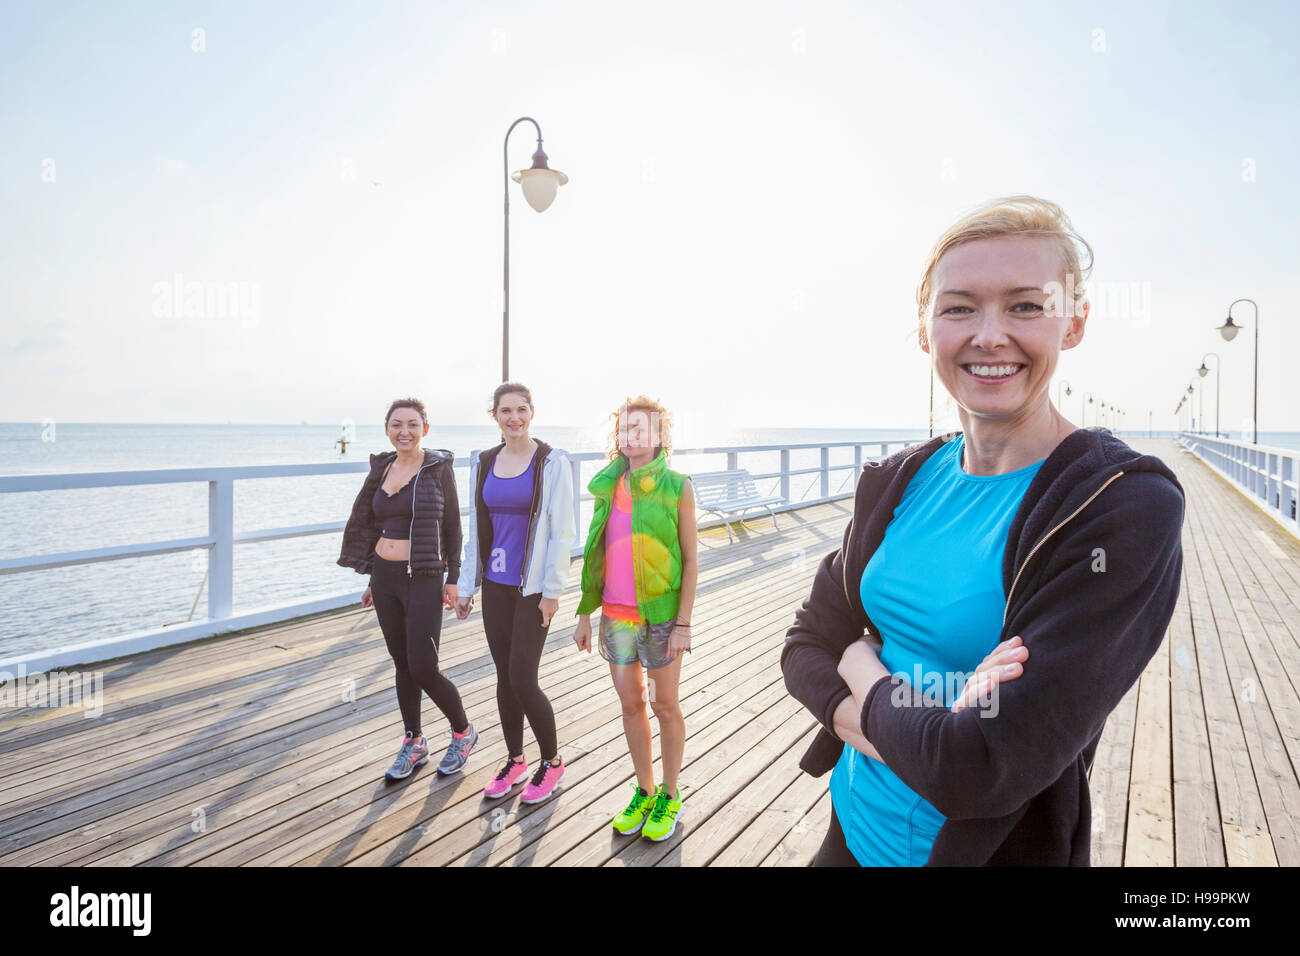 Group of women in sports clothing standing on jetty Stock Photo